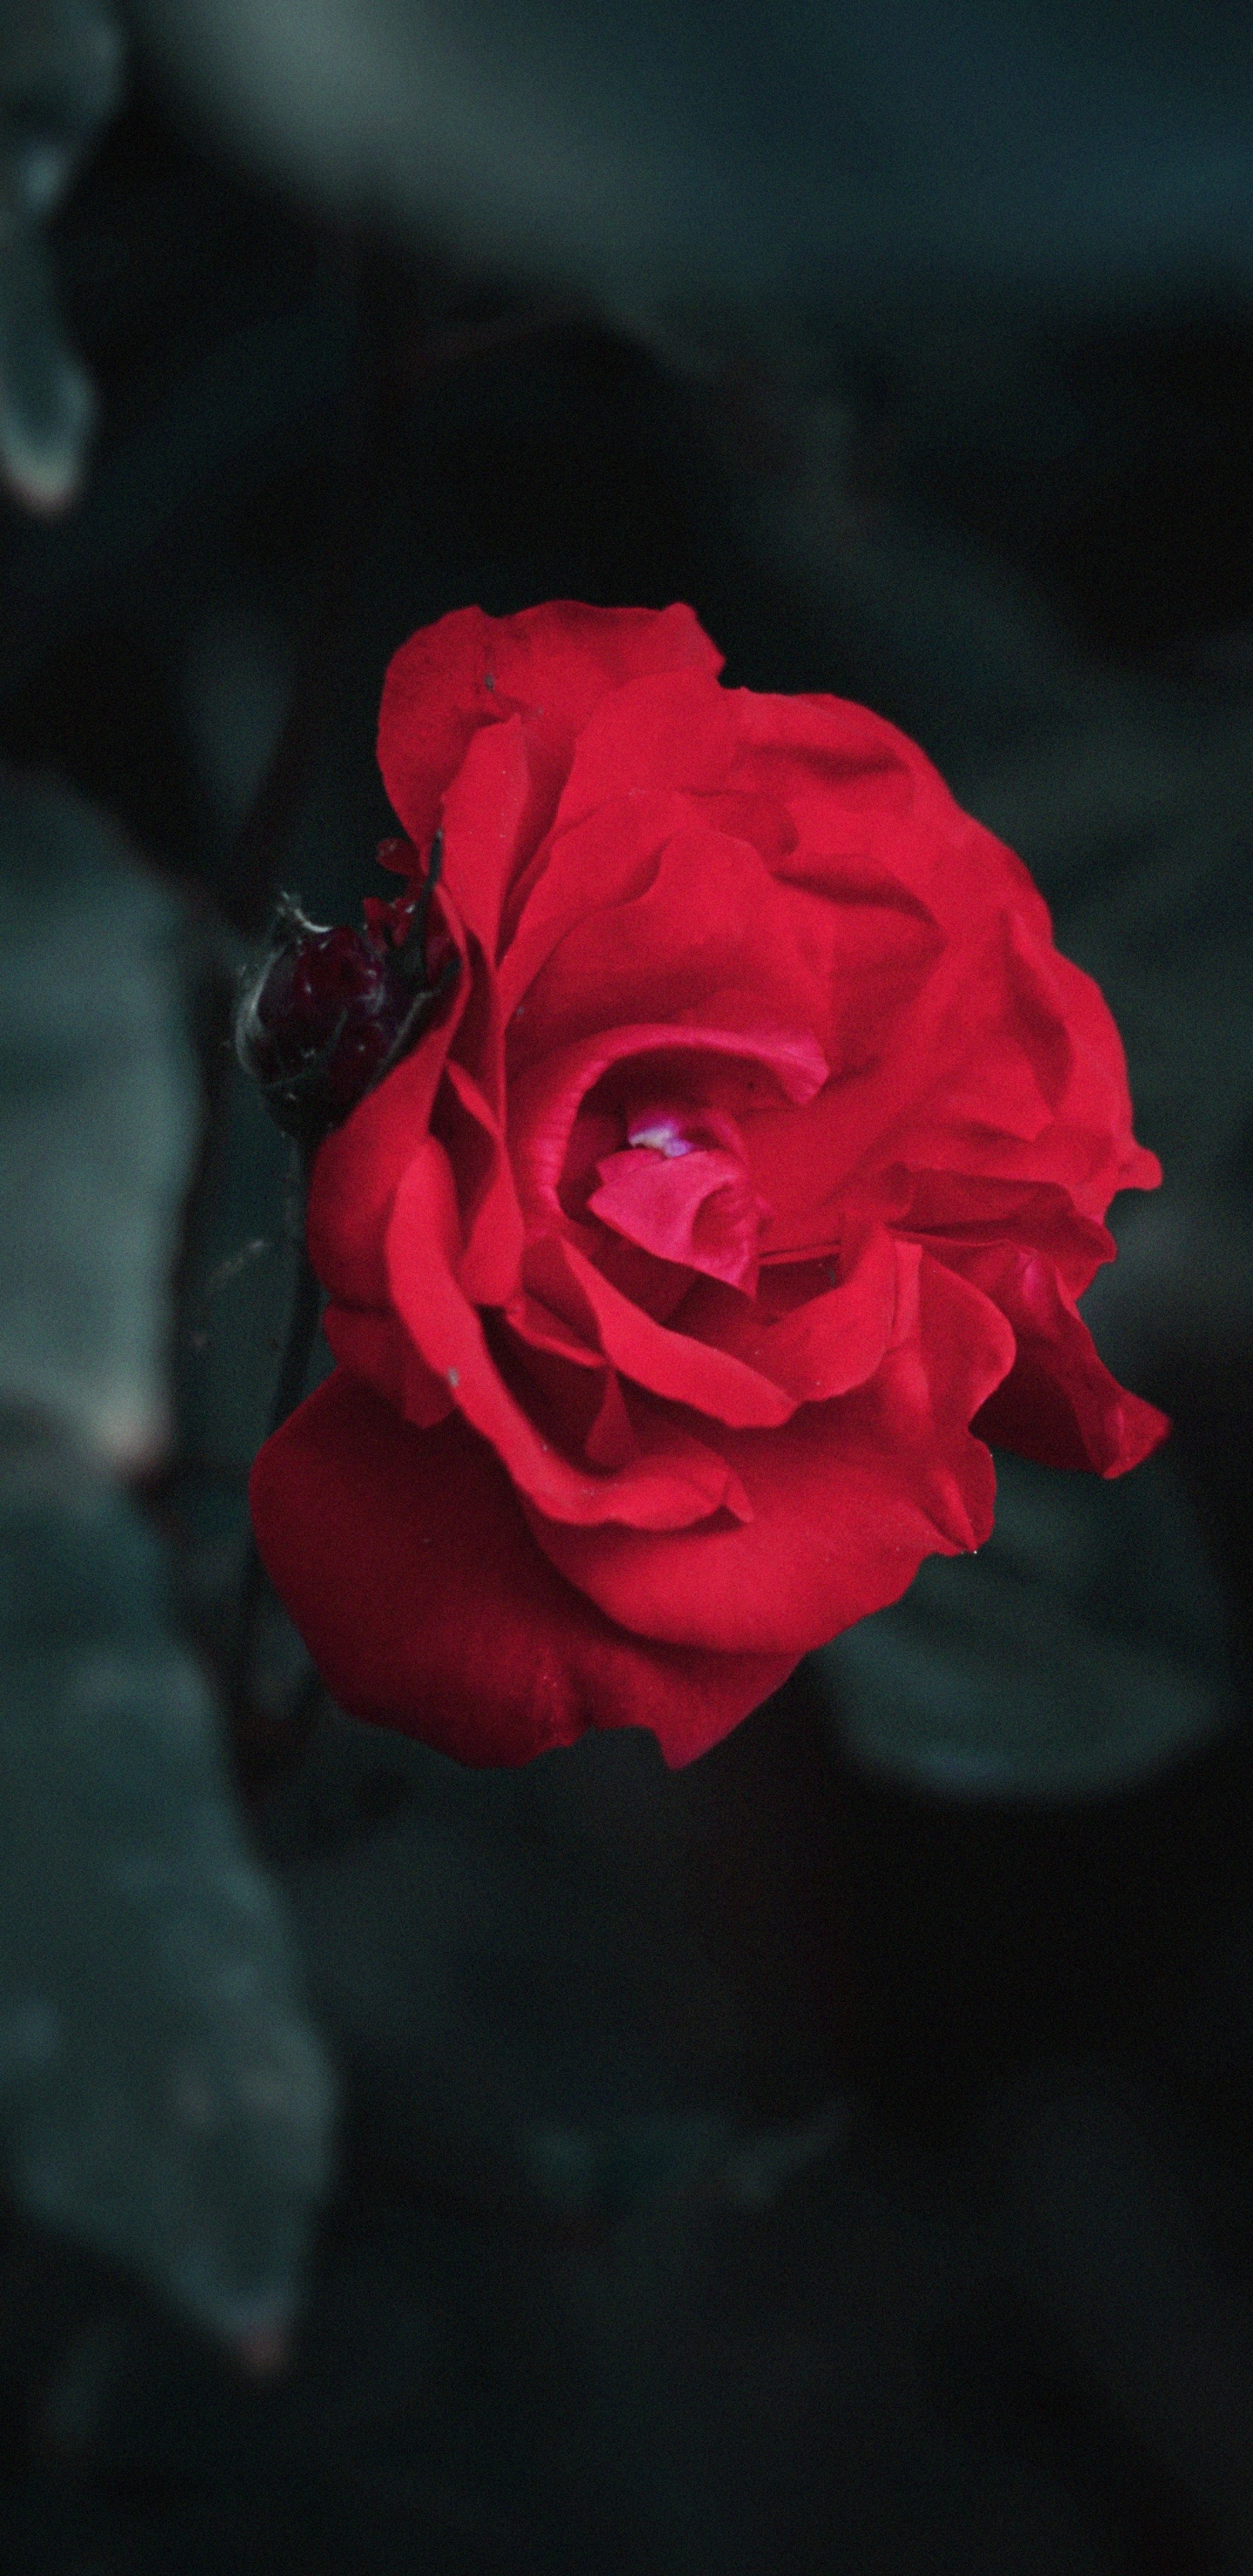 Red Rose in Close up Photography. Wallpaper in 1440x2960 Resolution